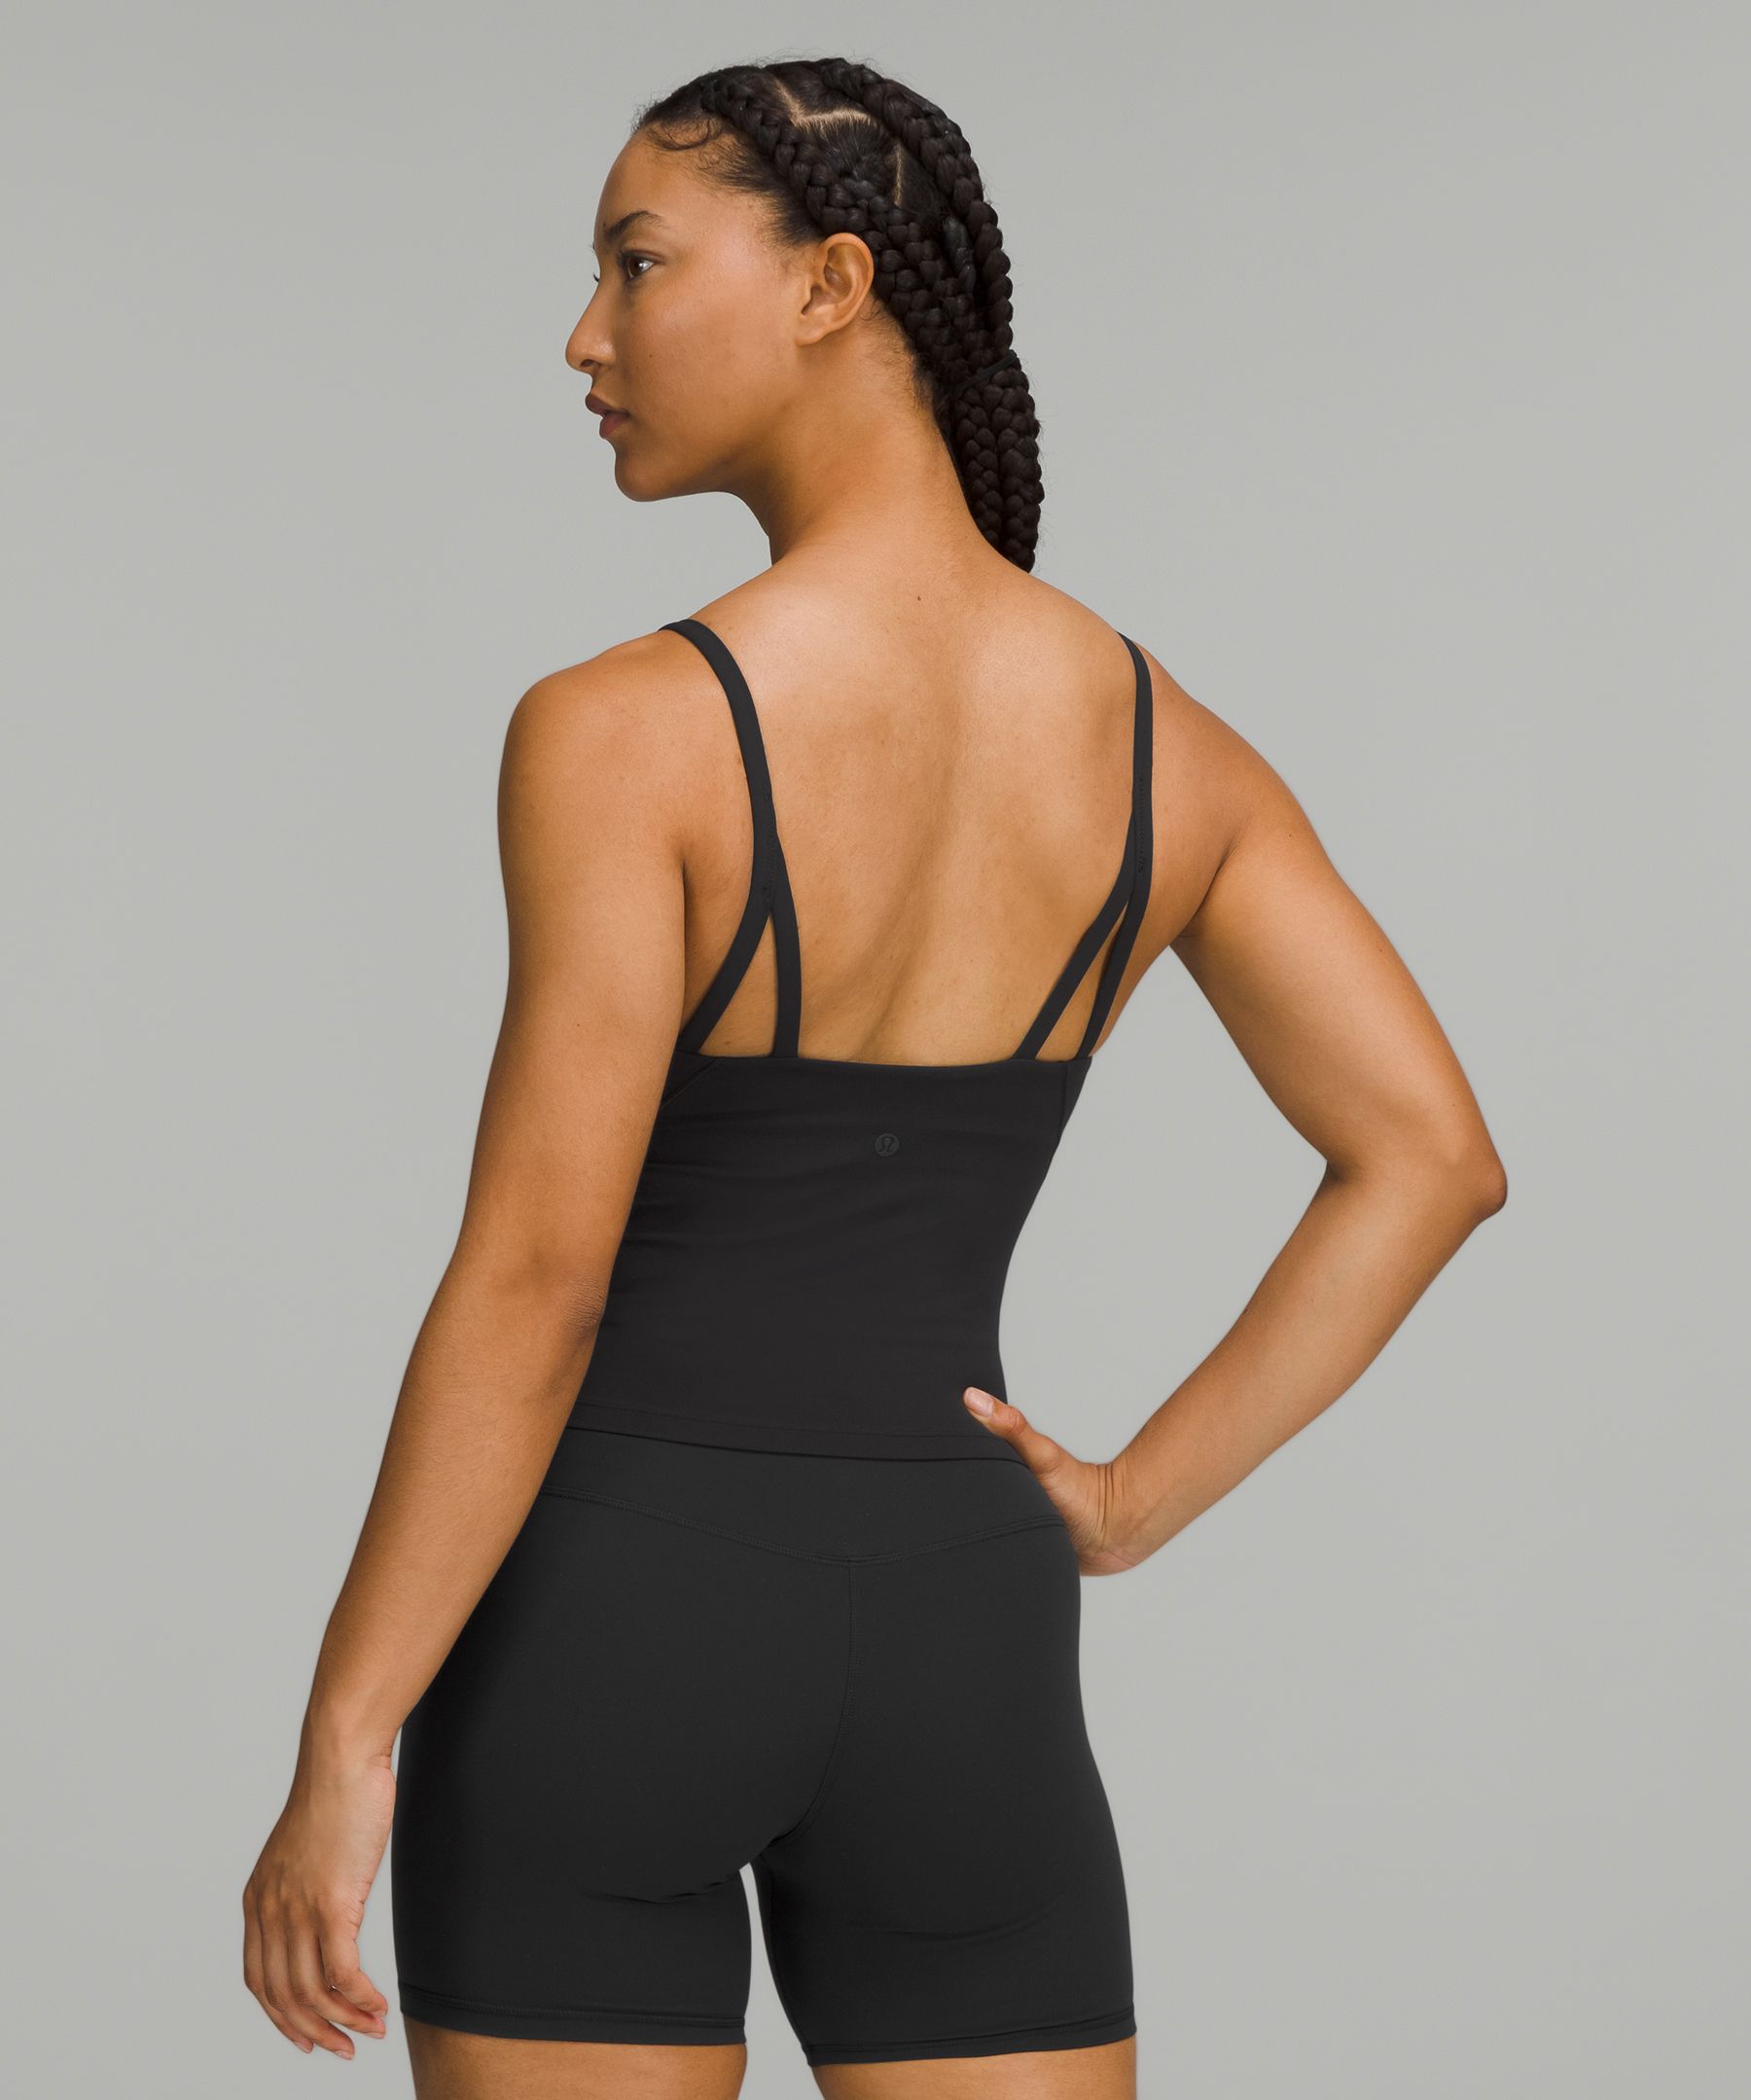 Lululemon Strappy Seamless Yoga Shelf Tank Top Size 6 NWT - $58 New With  Tags - From Leslee